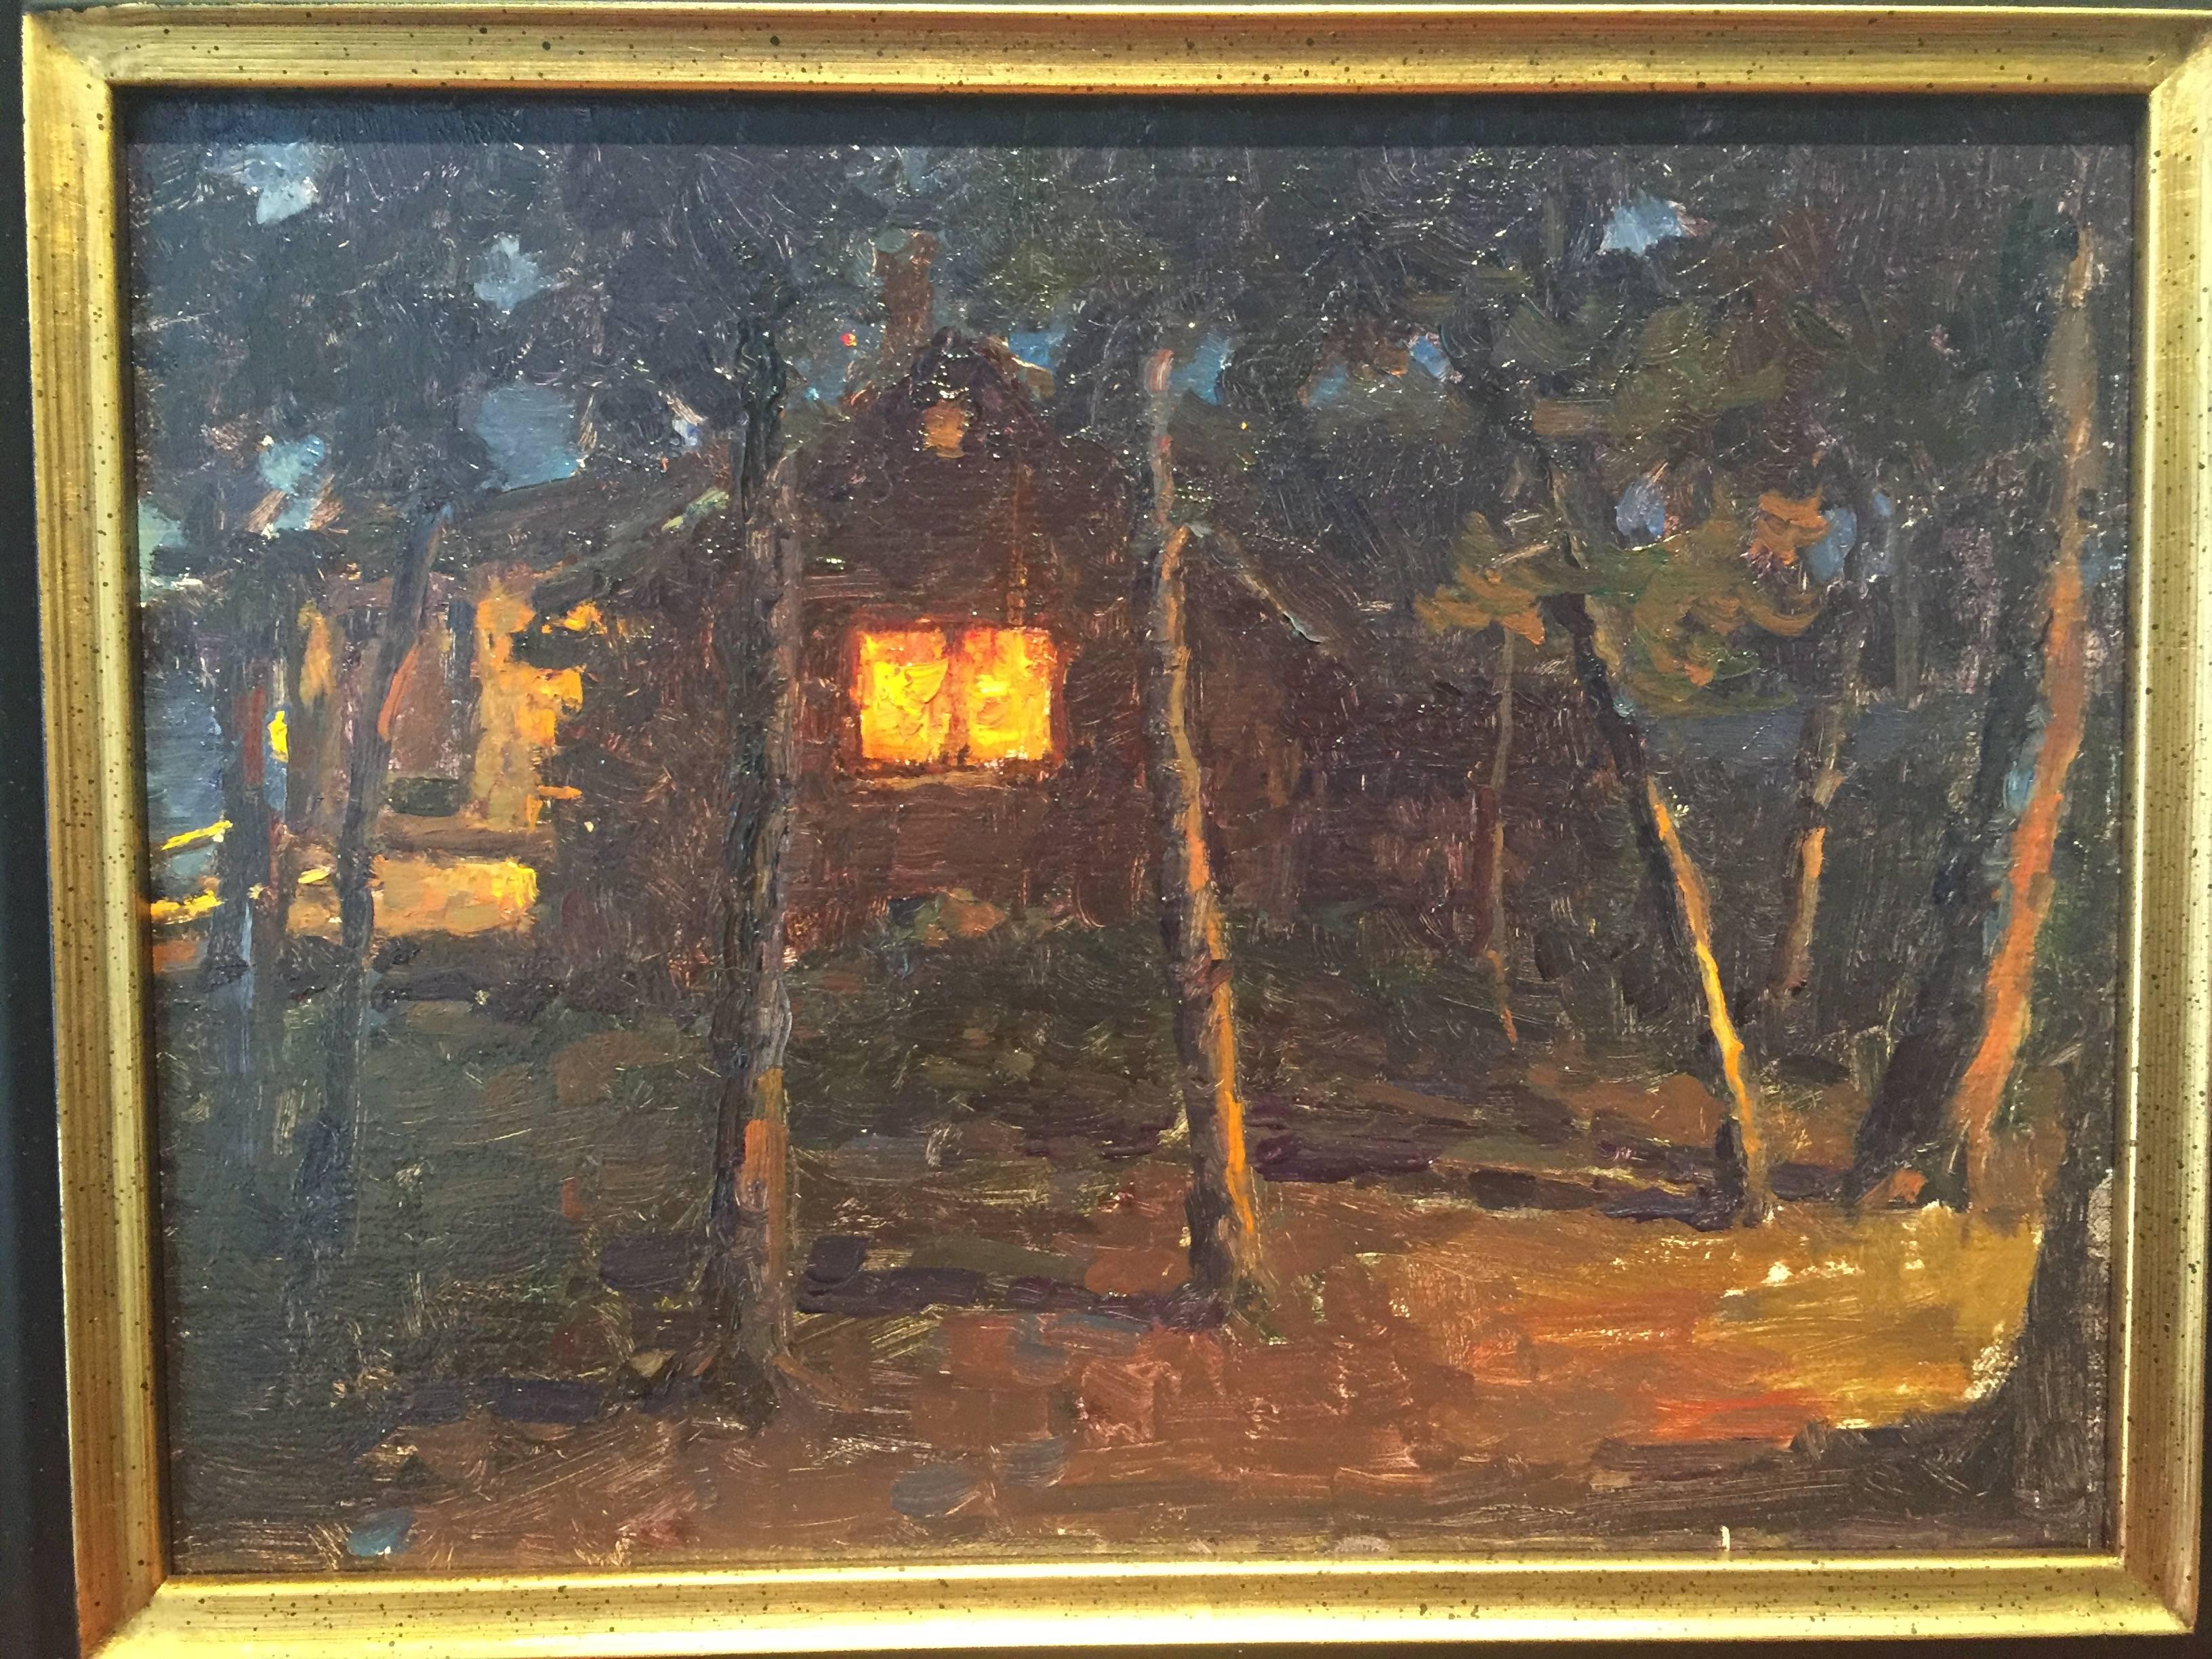 Cabin at Night - American Realist Painting by Carl Bretzke